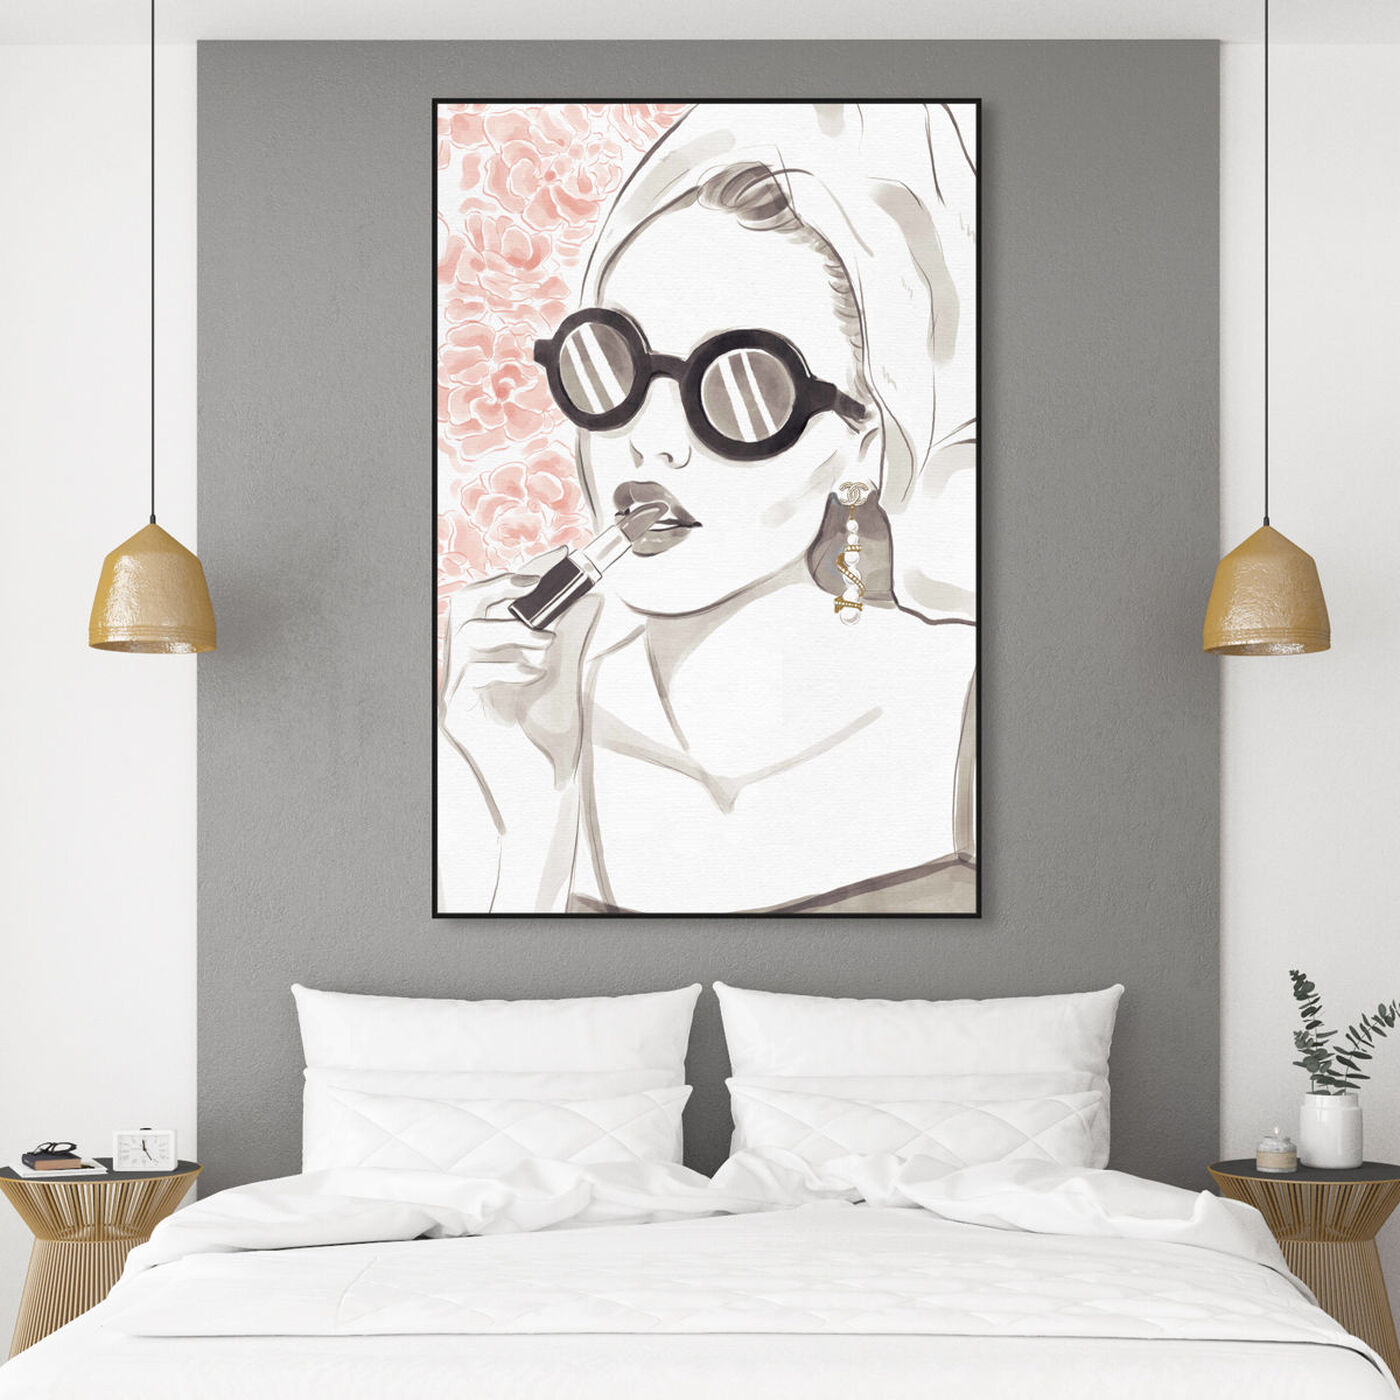 Hanging view of Sunglasses Bomb Beauty featuring fashion and glam and portraits art.